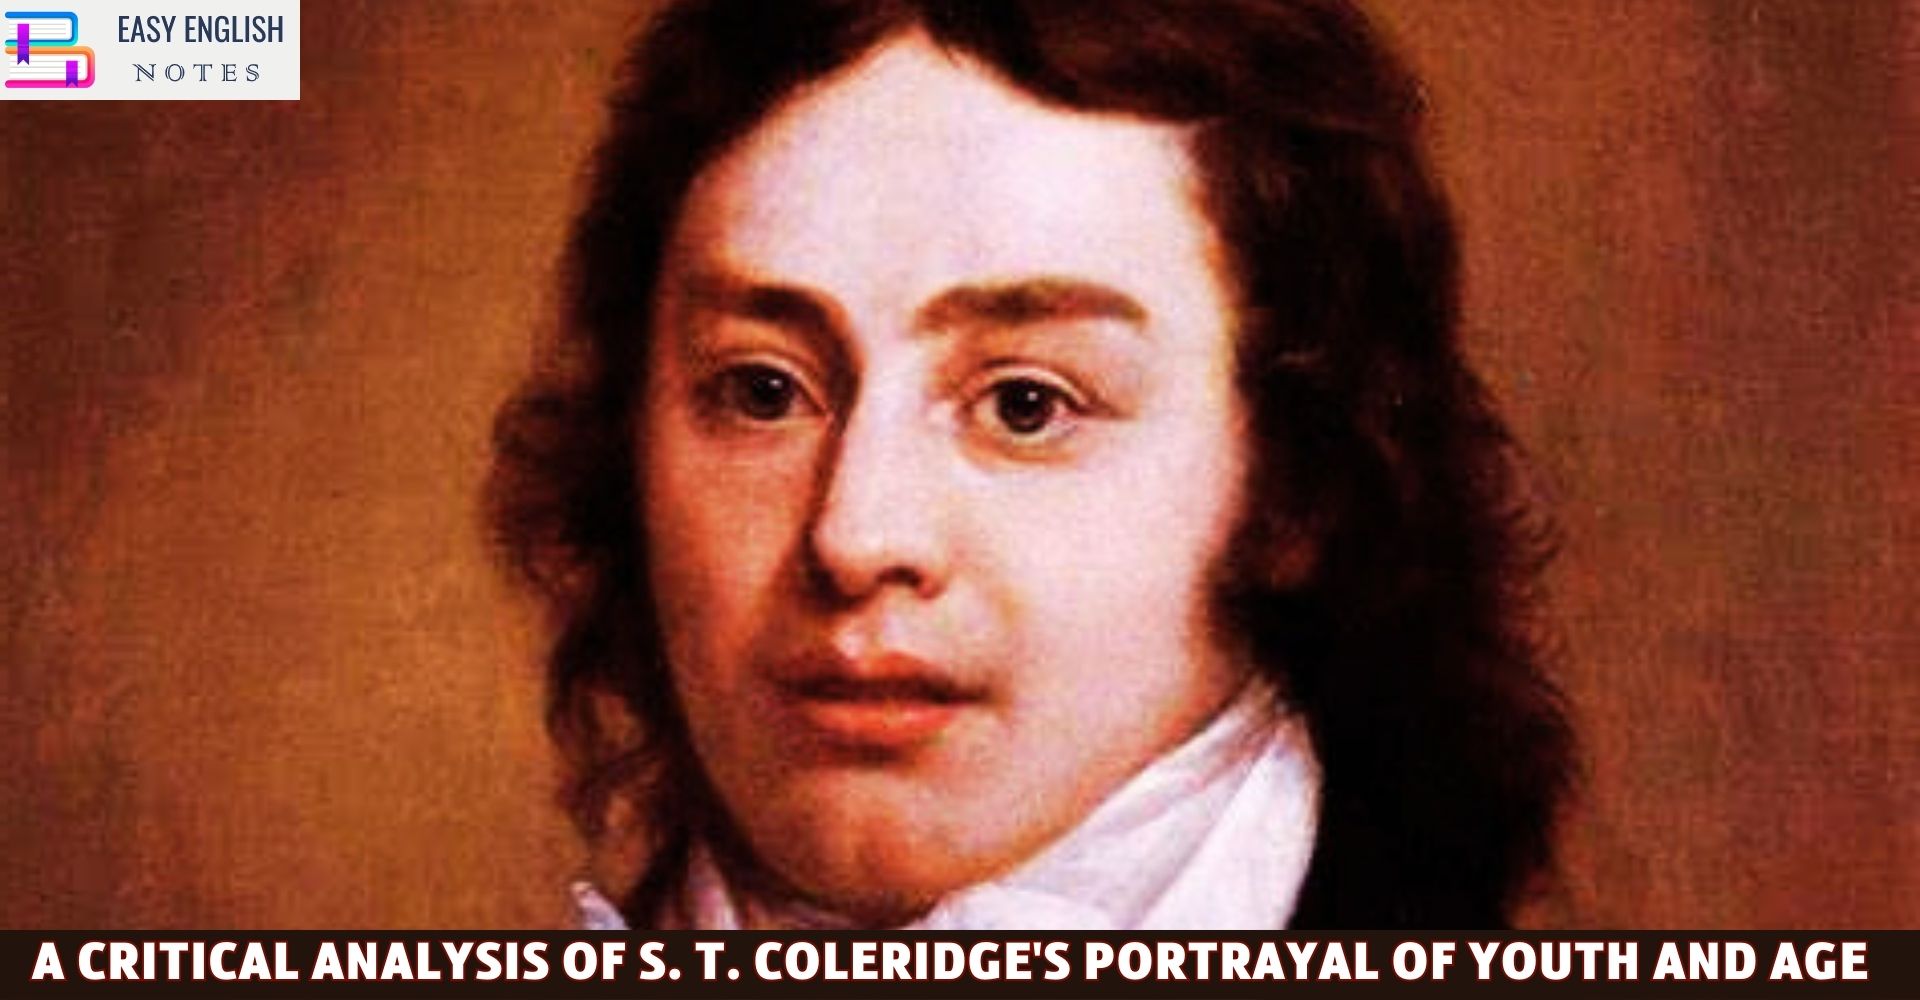 A Critical Analysis of S. T. Coleridge's Portrayal of Youth and Age